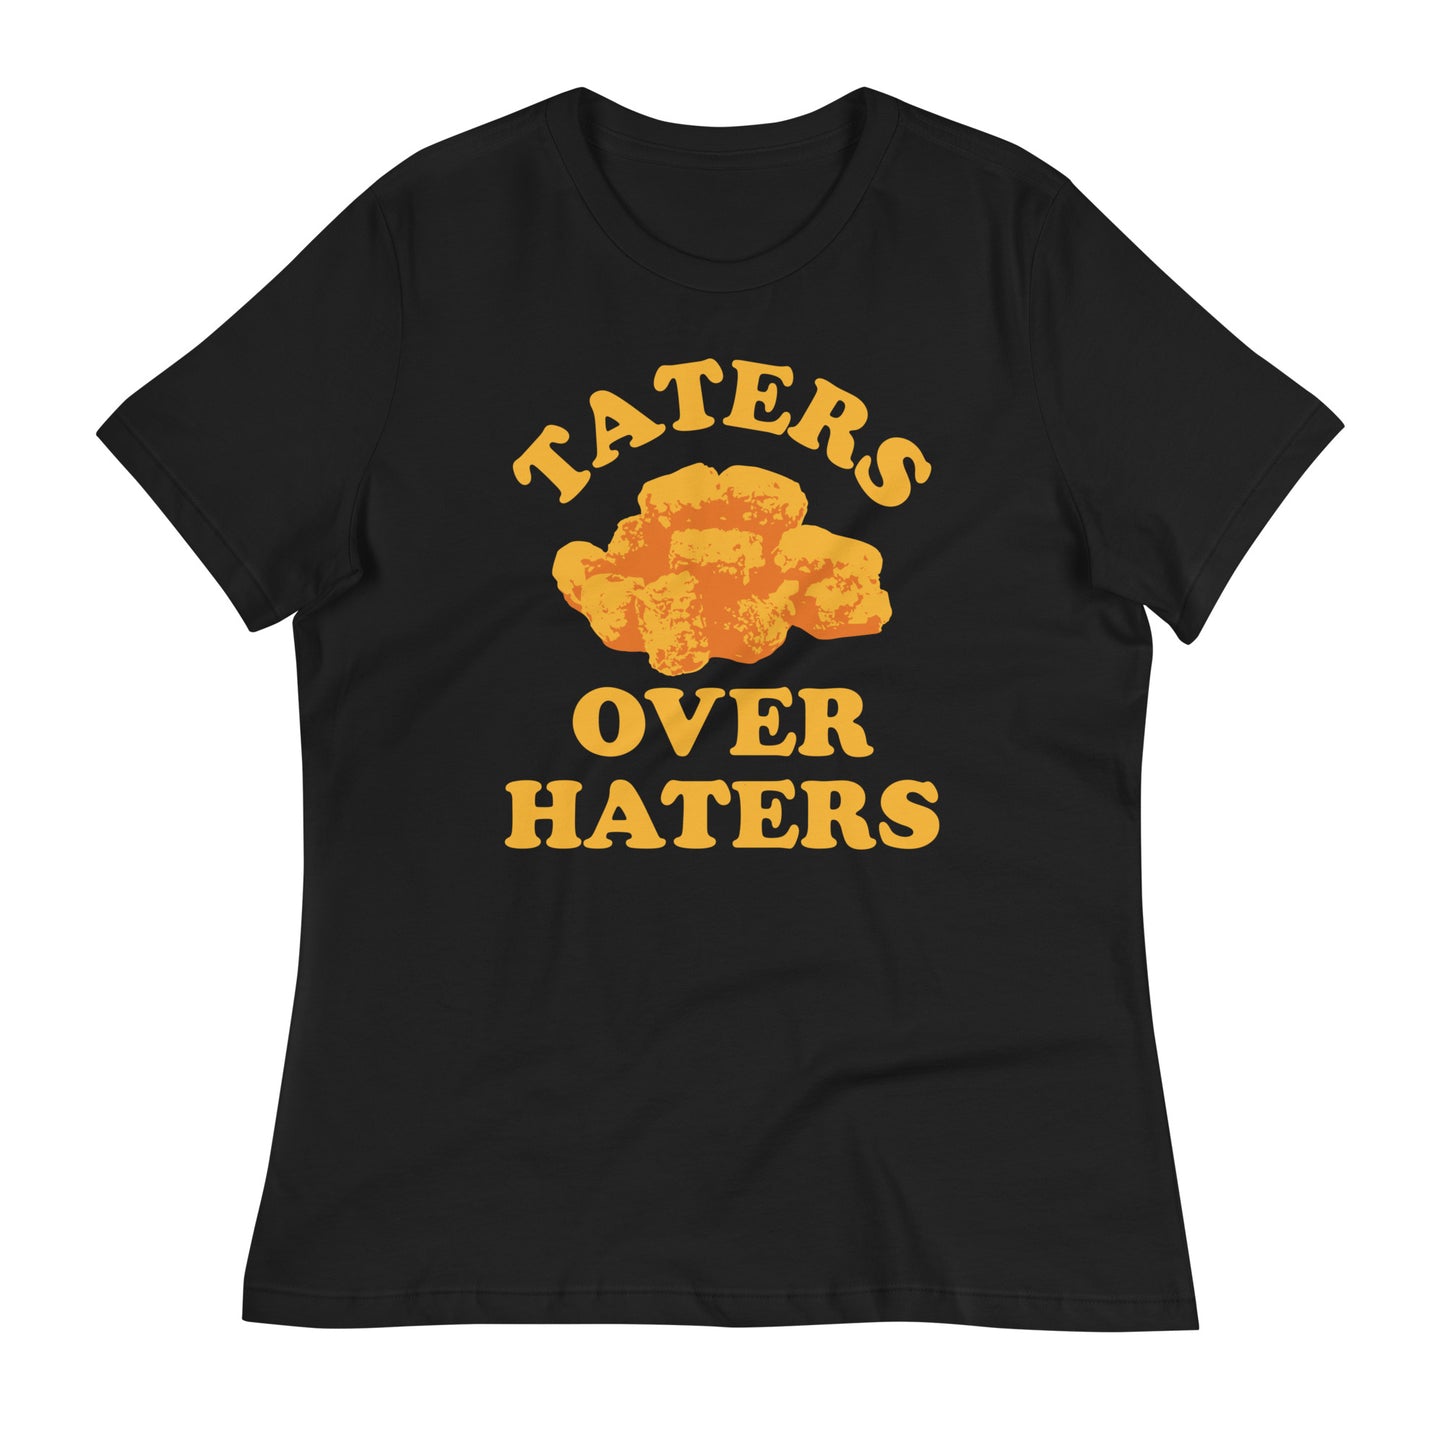 Taters Over Haters Women's Signature Tee